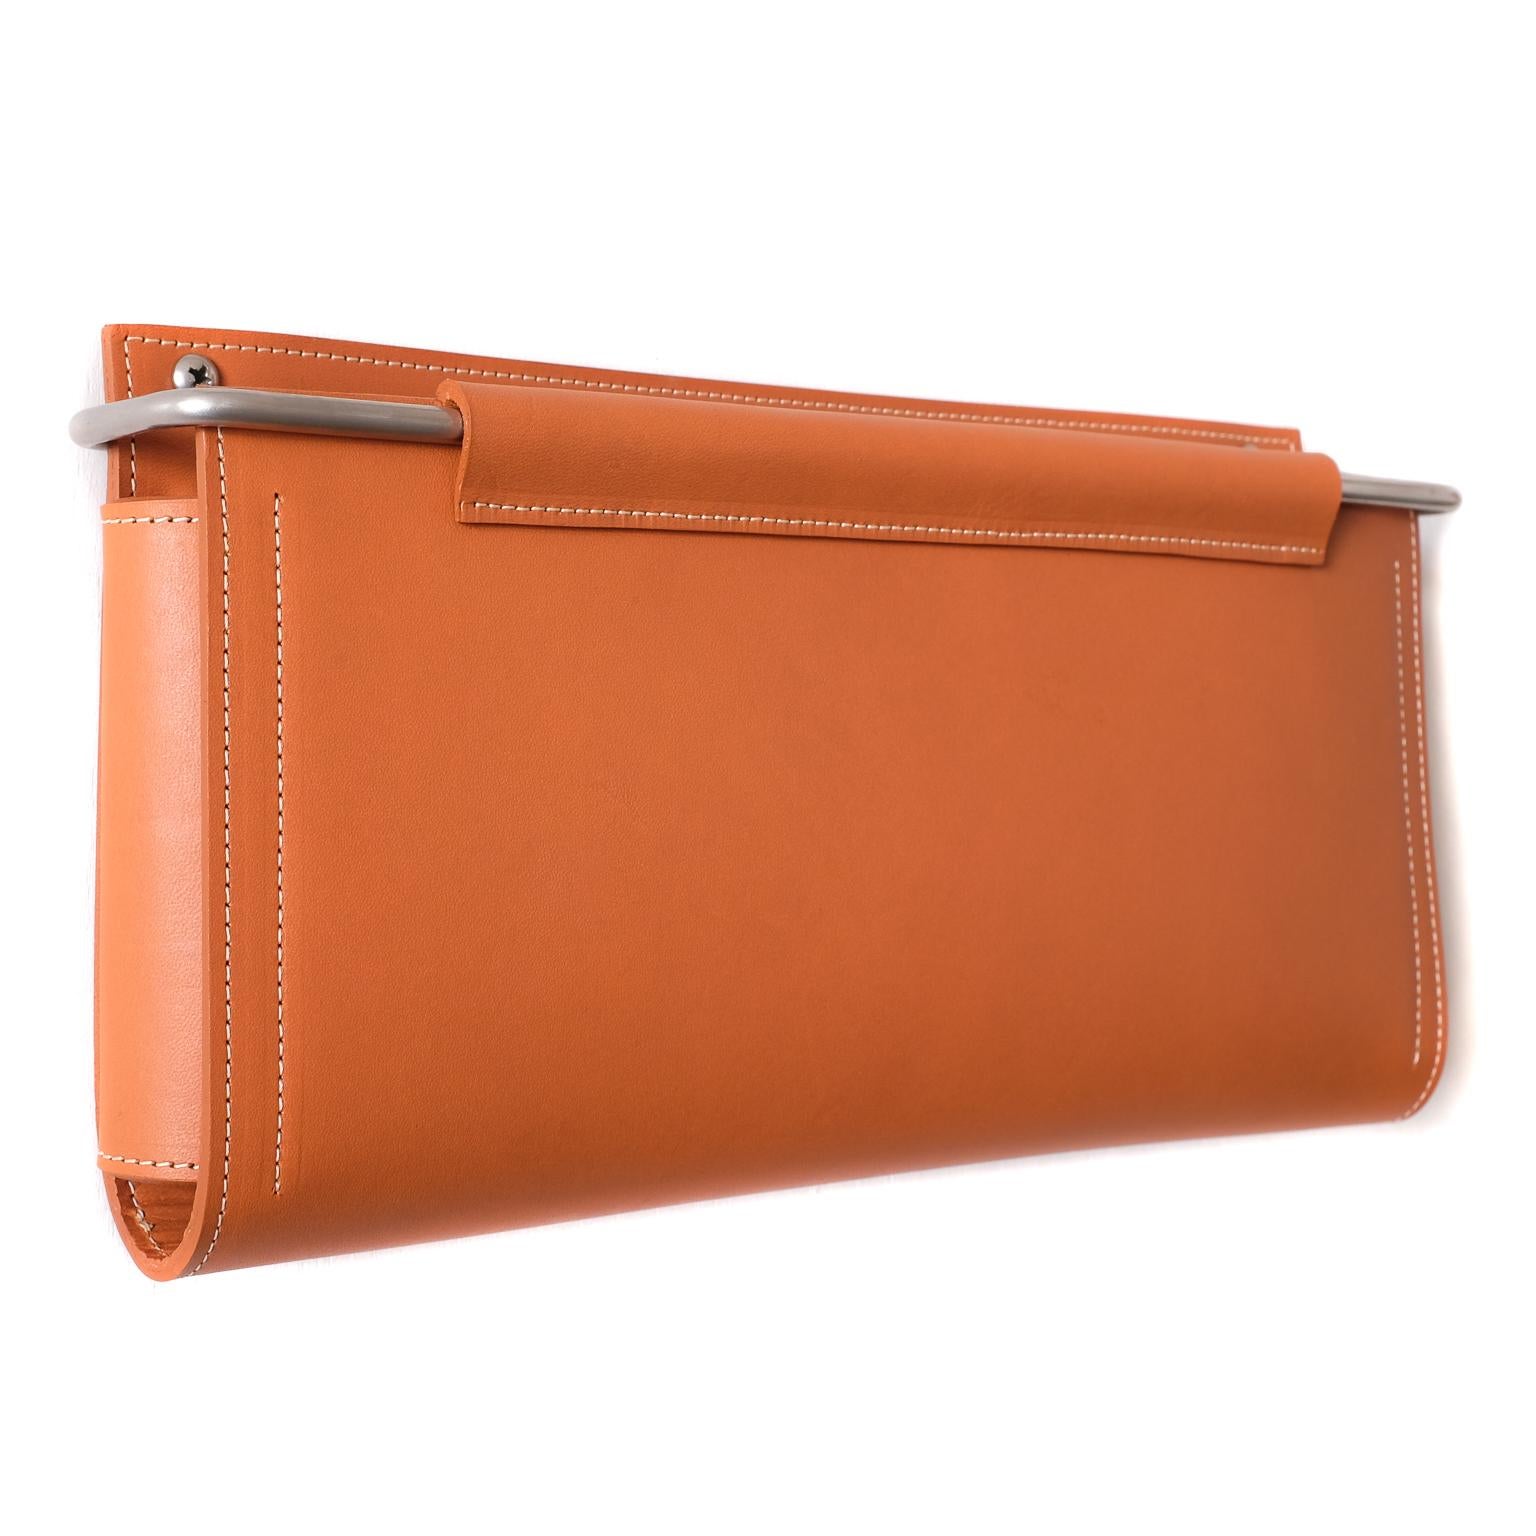 Wall Pocket 12"Lx1.5"x7"H in Saddle Leather and Stainless Steel by Moses Nadel